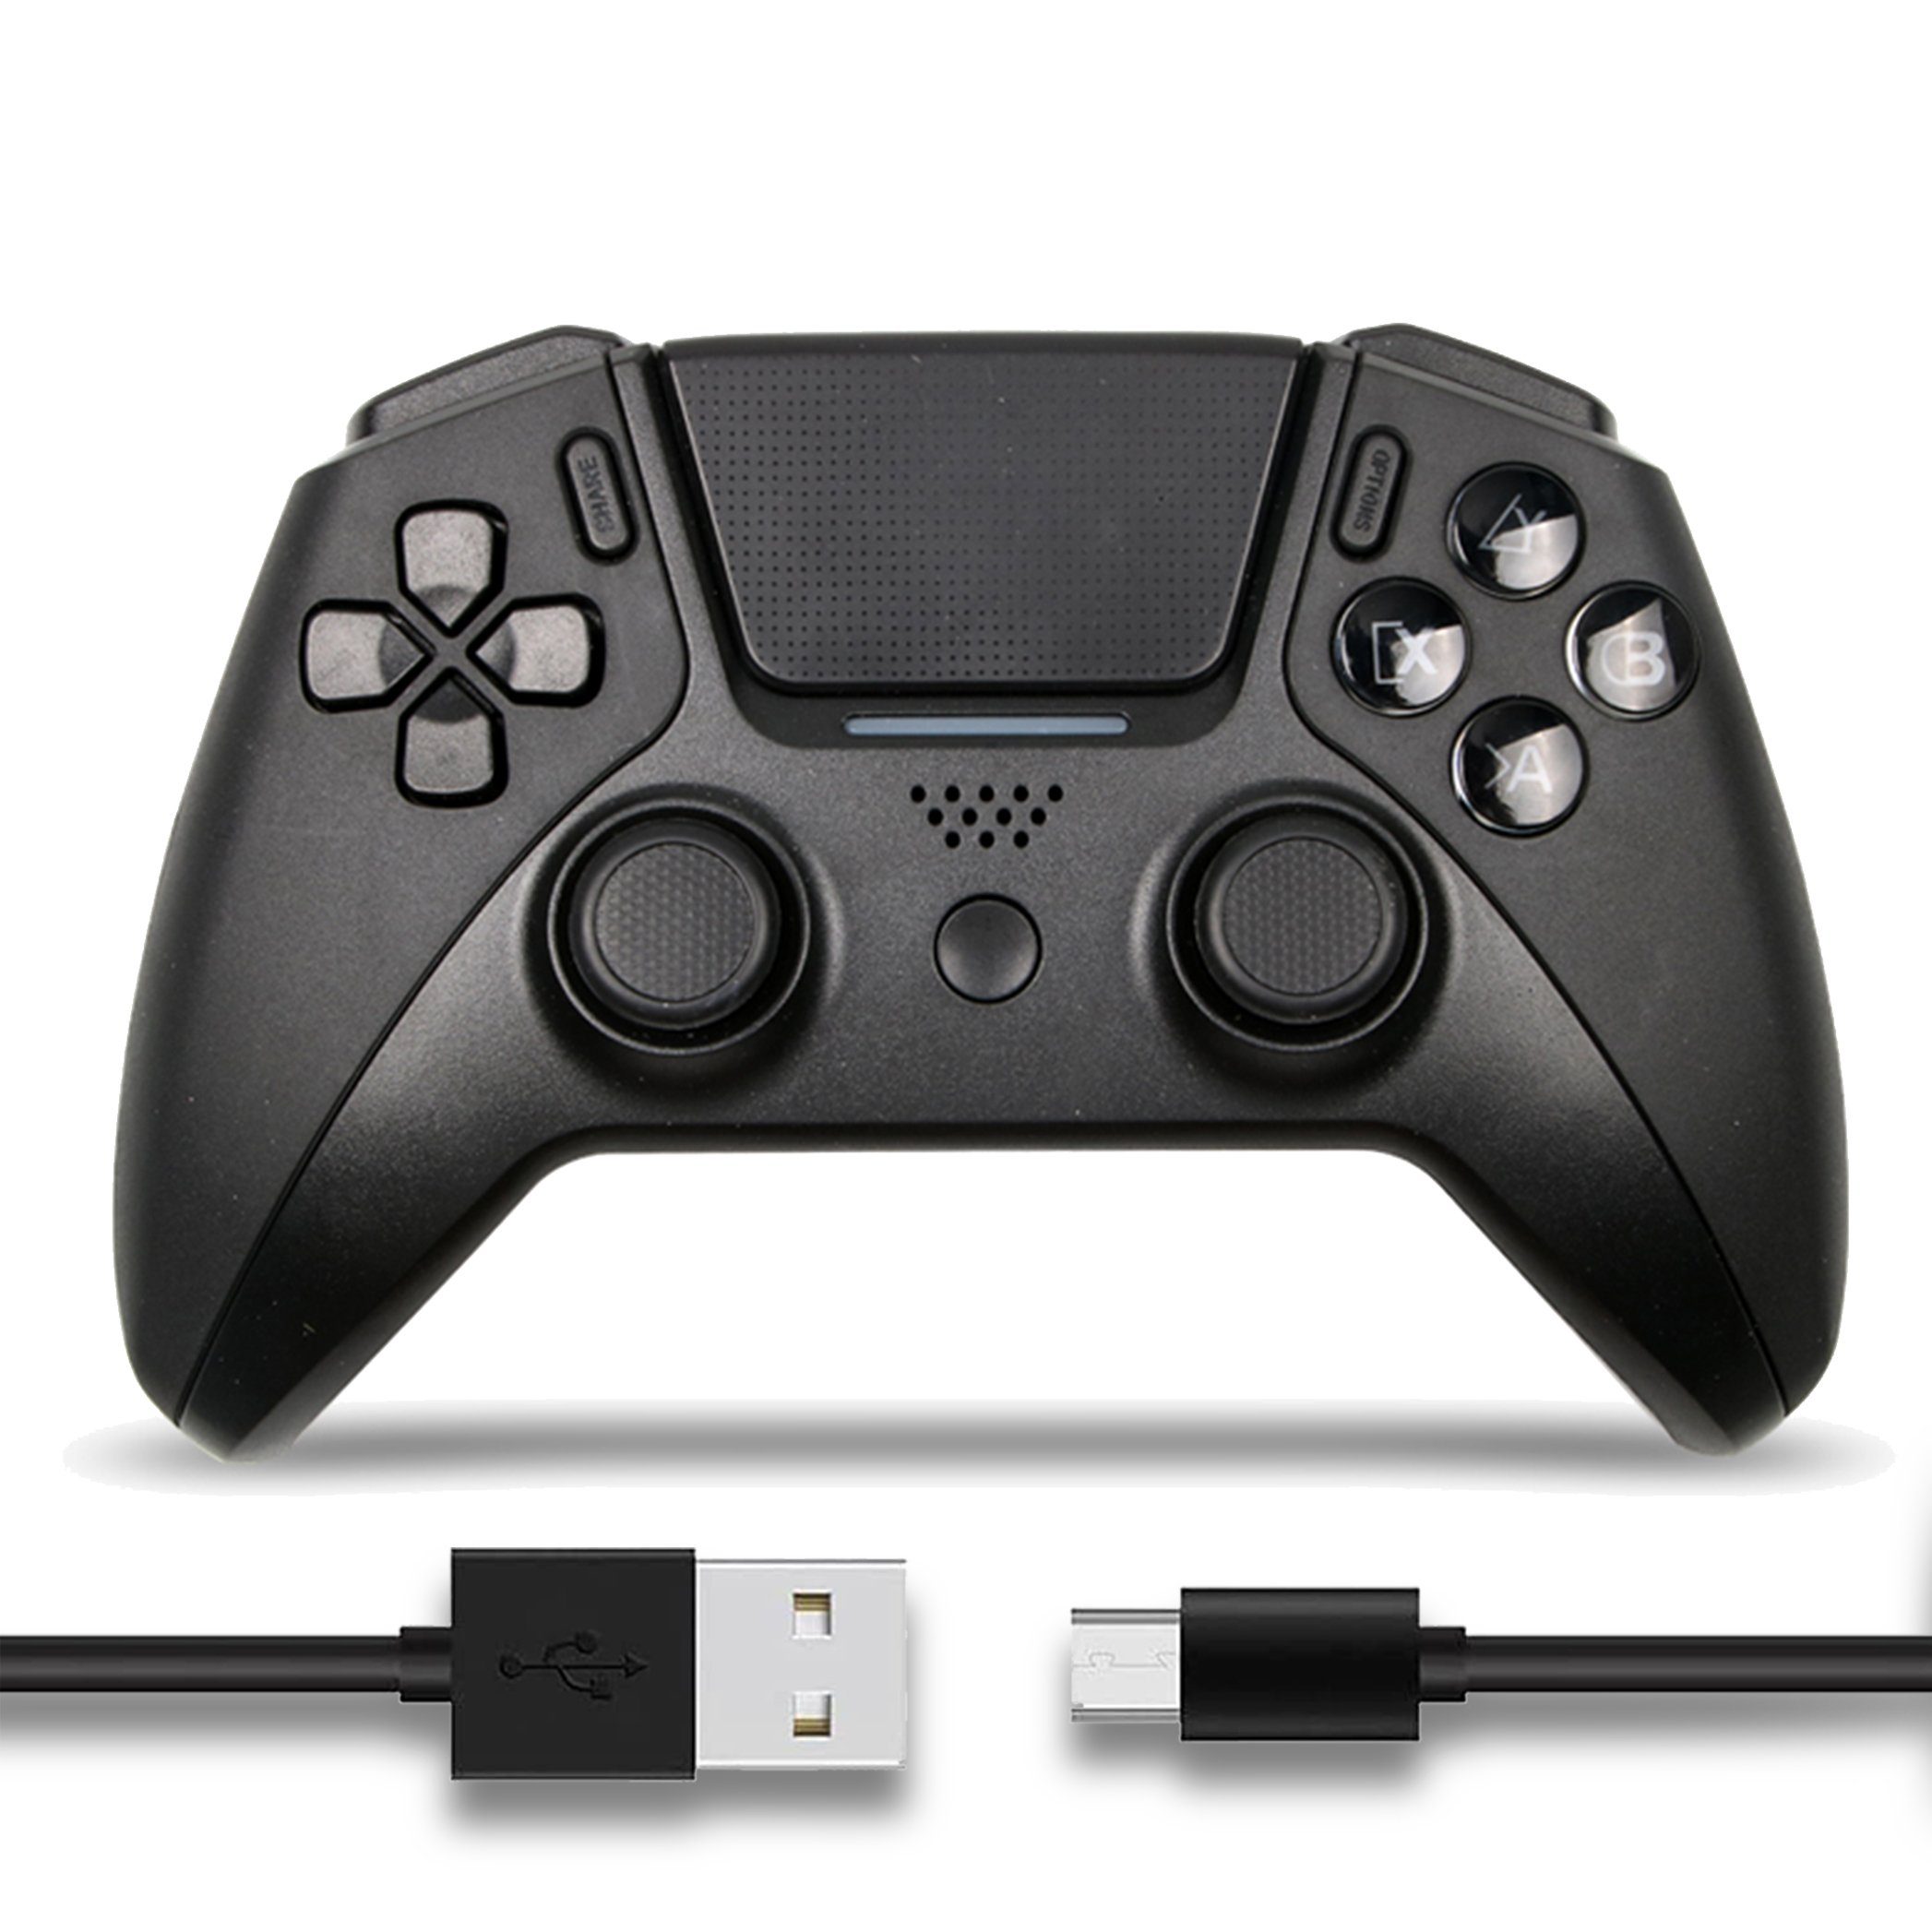 Tadow Gamepad, Game Controller, für PS4/PS3/PC, Wireless, Bluetooth  PlayStation 4-Controller